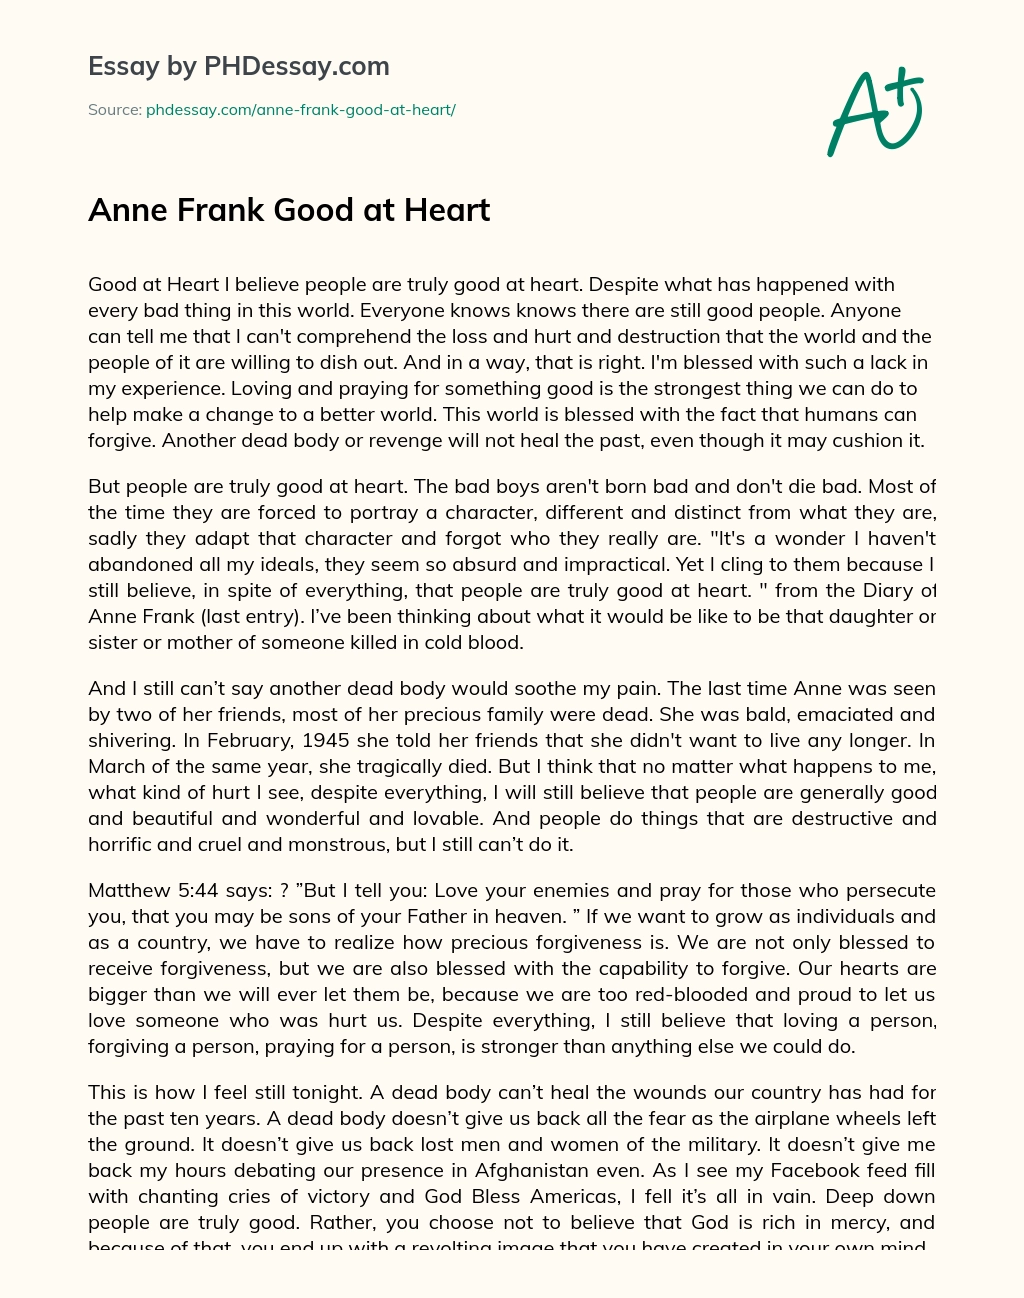 Anne Frank Good at Heart essay